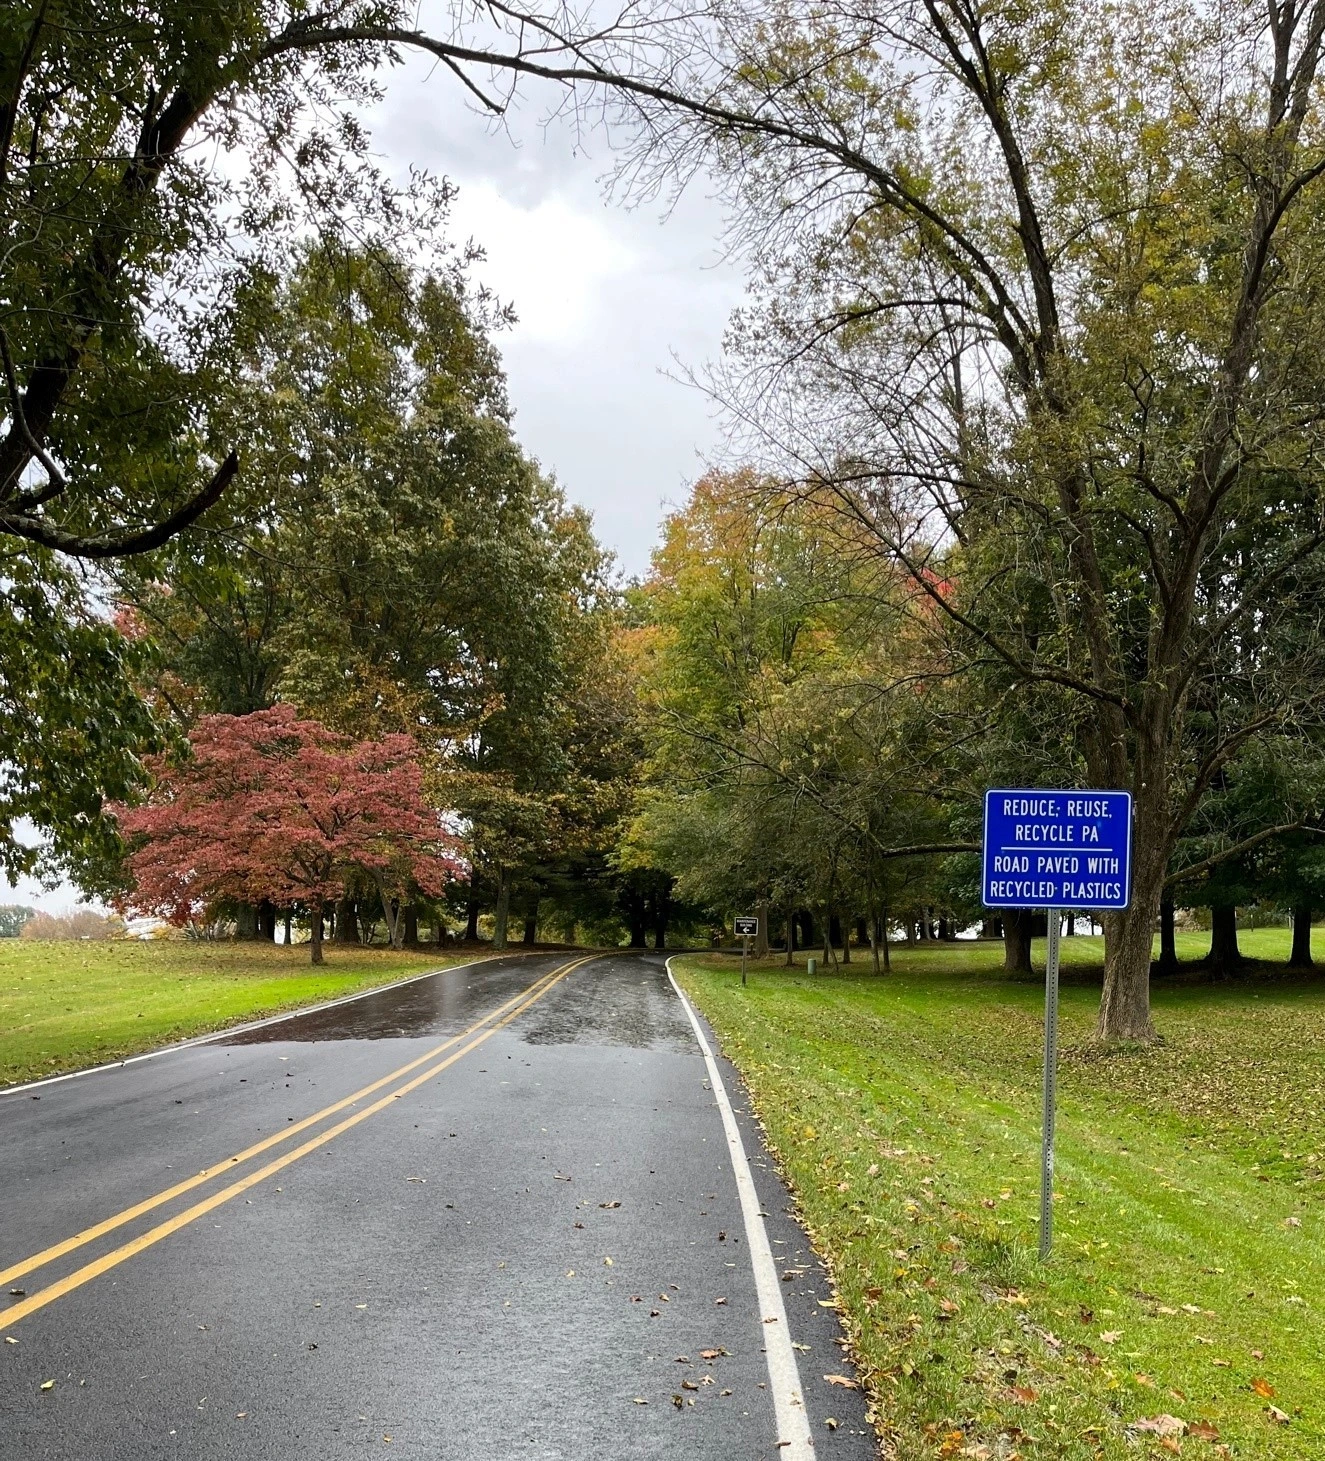 An image of a roadway lined with trees and grass with a blue sign that states the road was paved with recycled plastics.